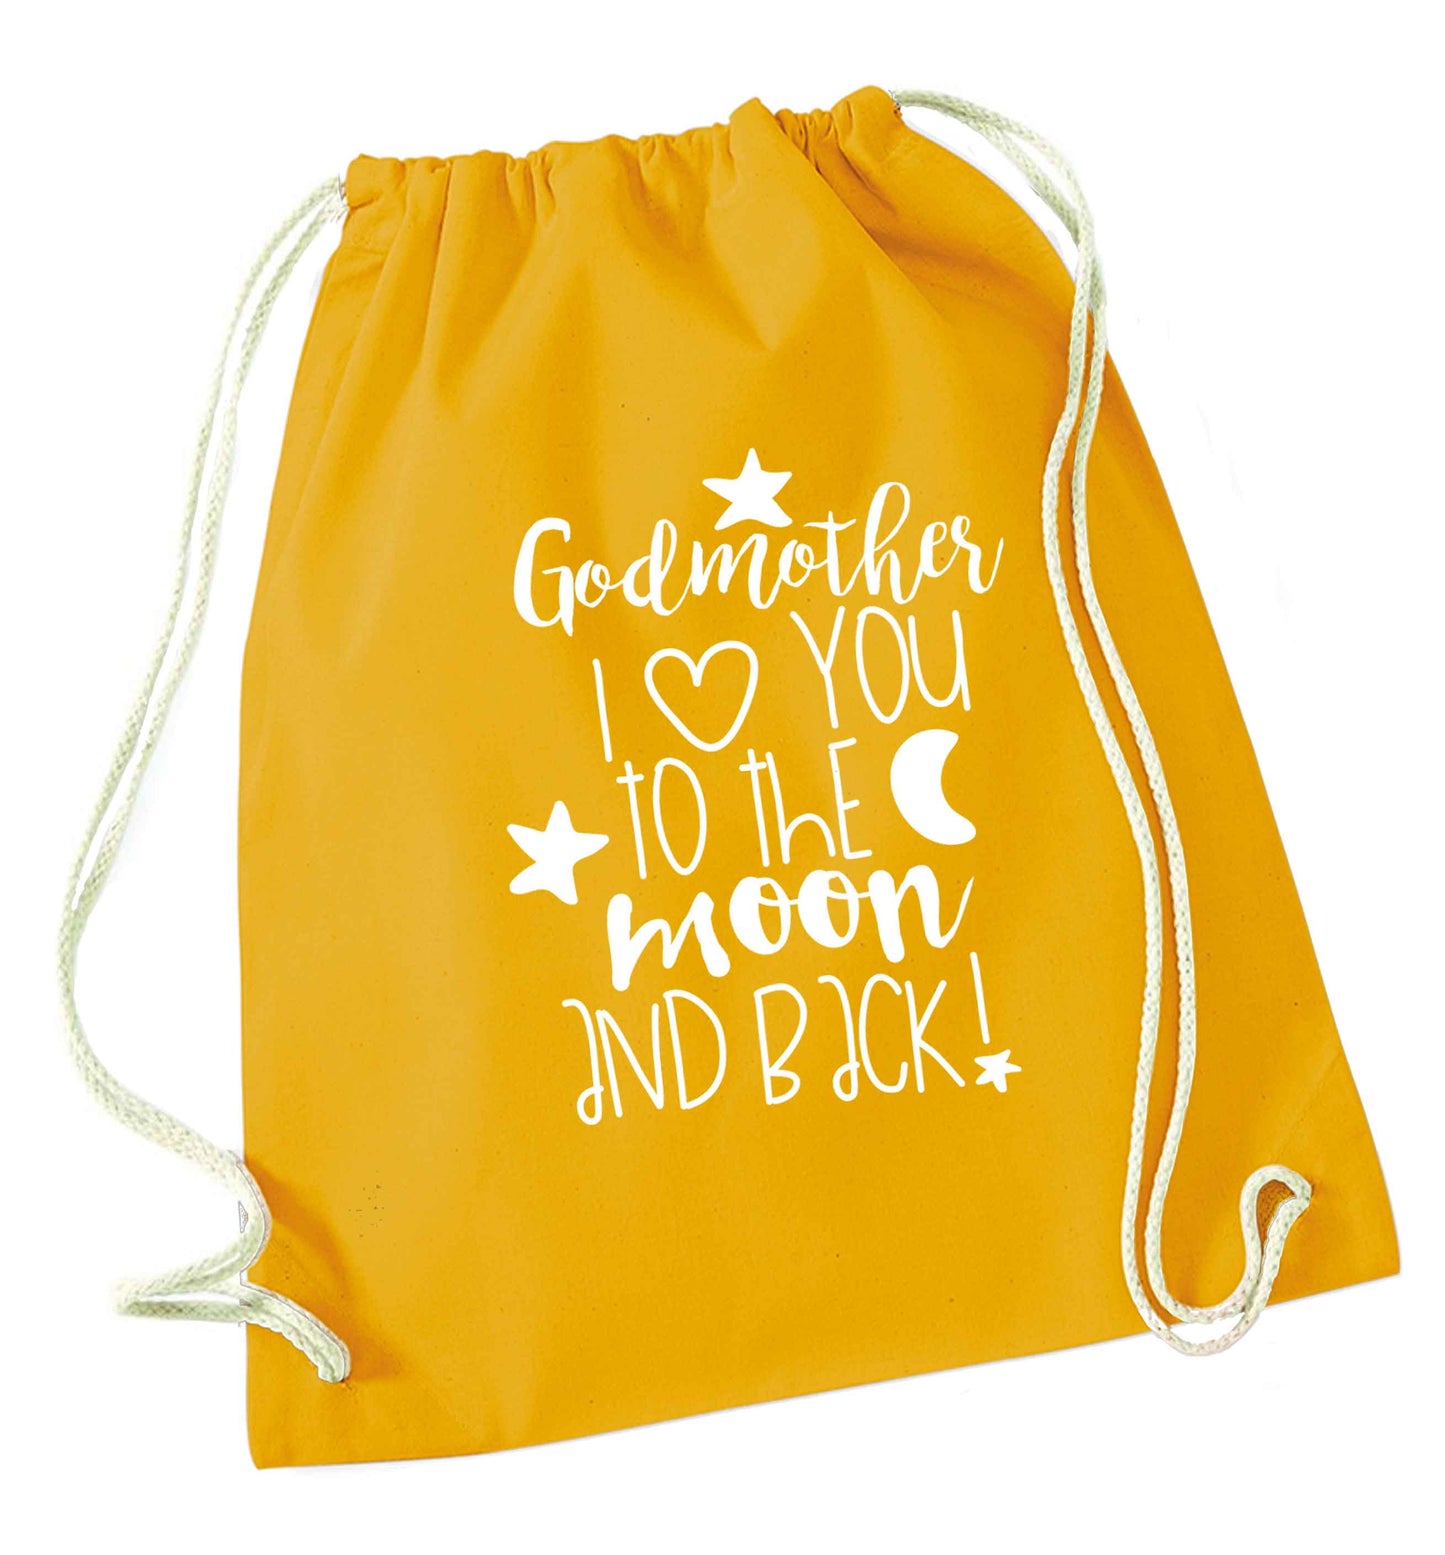 Godmother I love you to the moon and back mustard drawstring bag